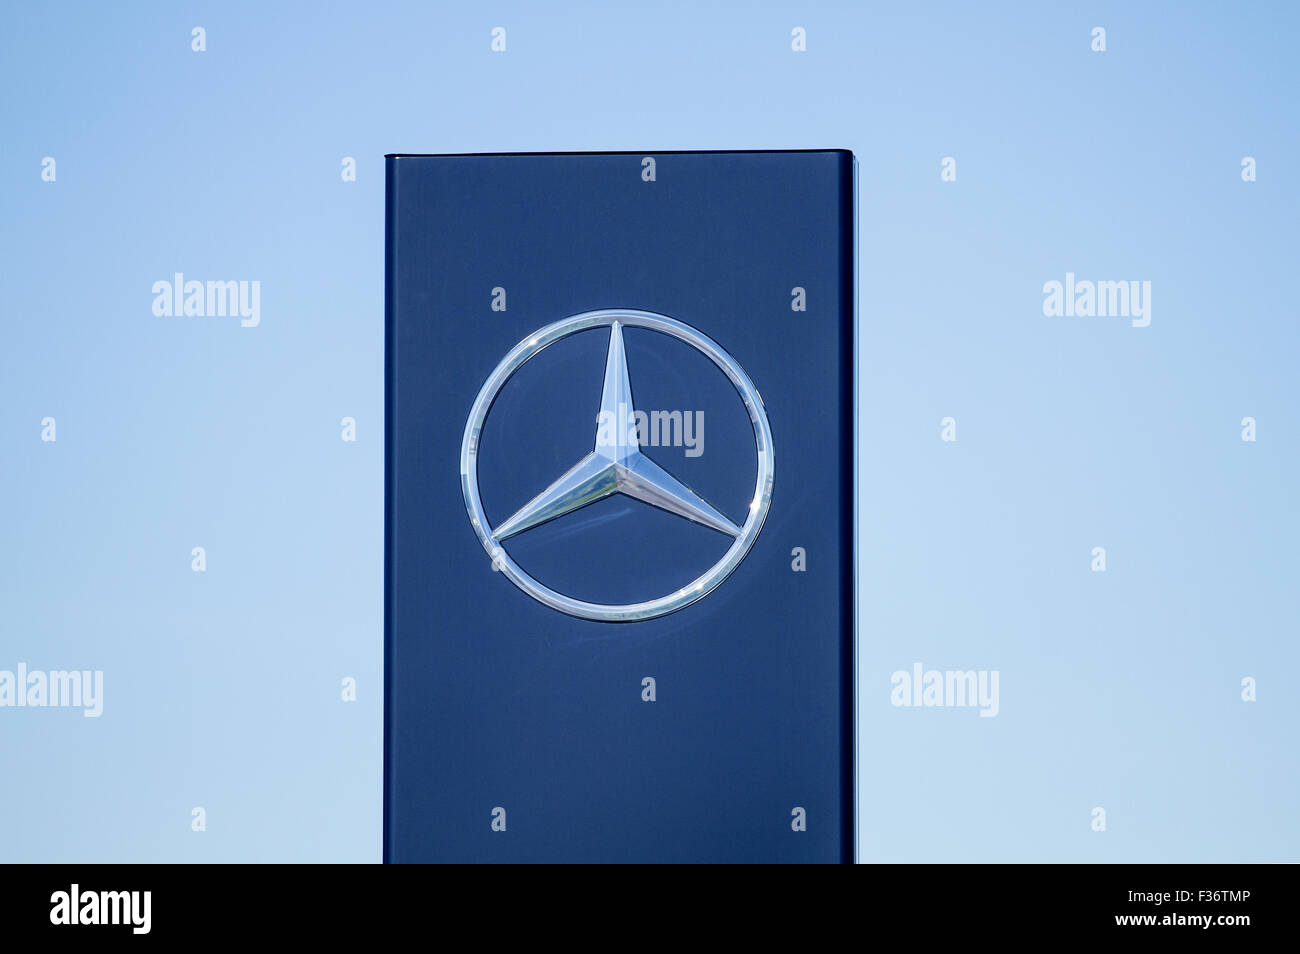 Star shape logo of the make of German car Mercedes-Benz motorcar Daimler AG Group at the Mercedes showroom in Dundee, UK. Stock Photo